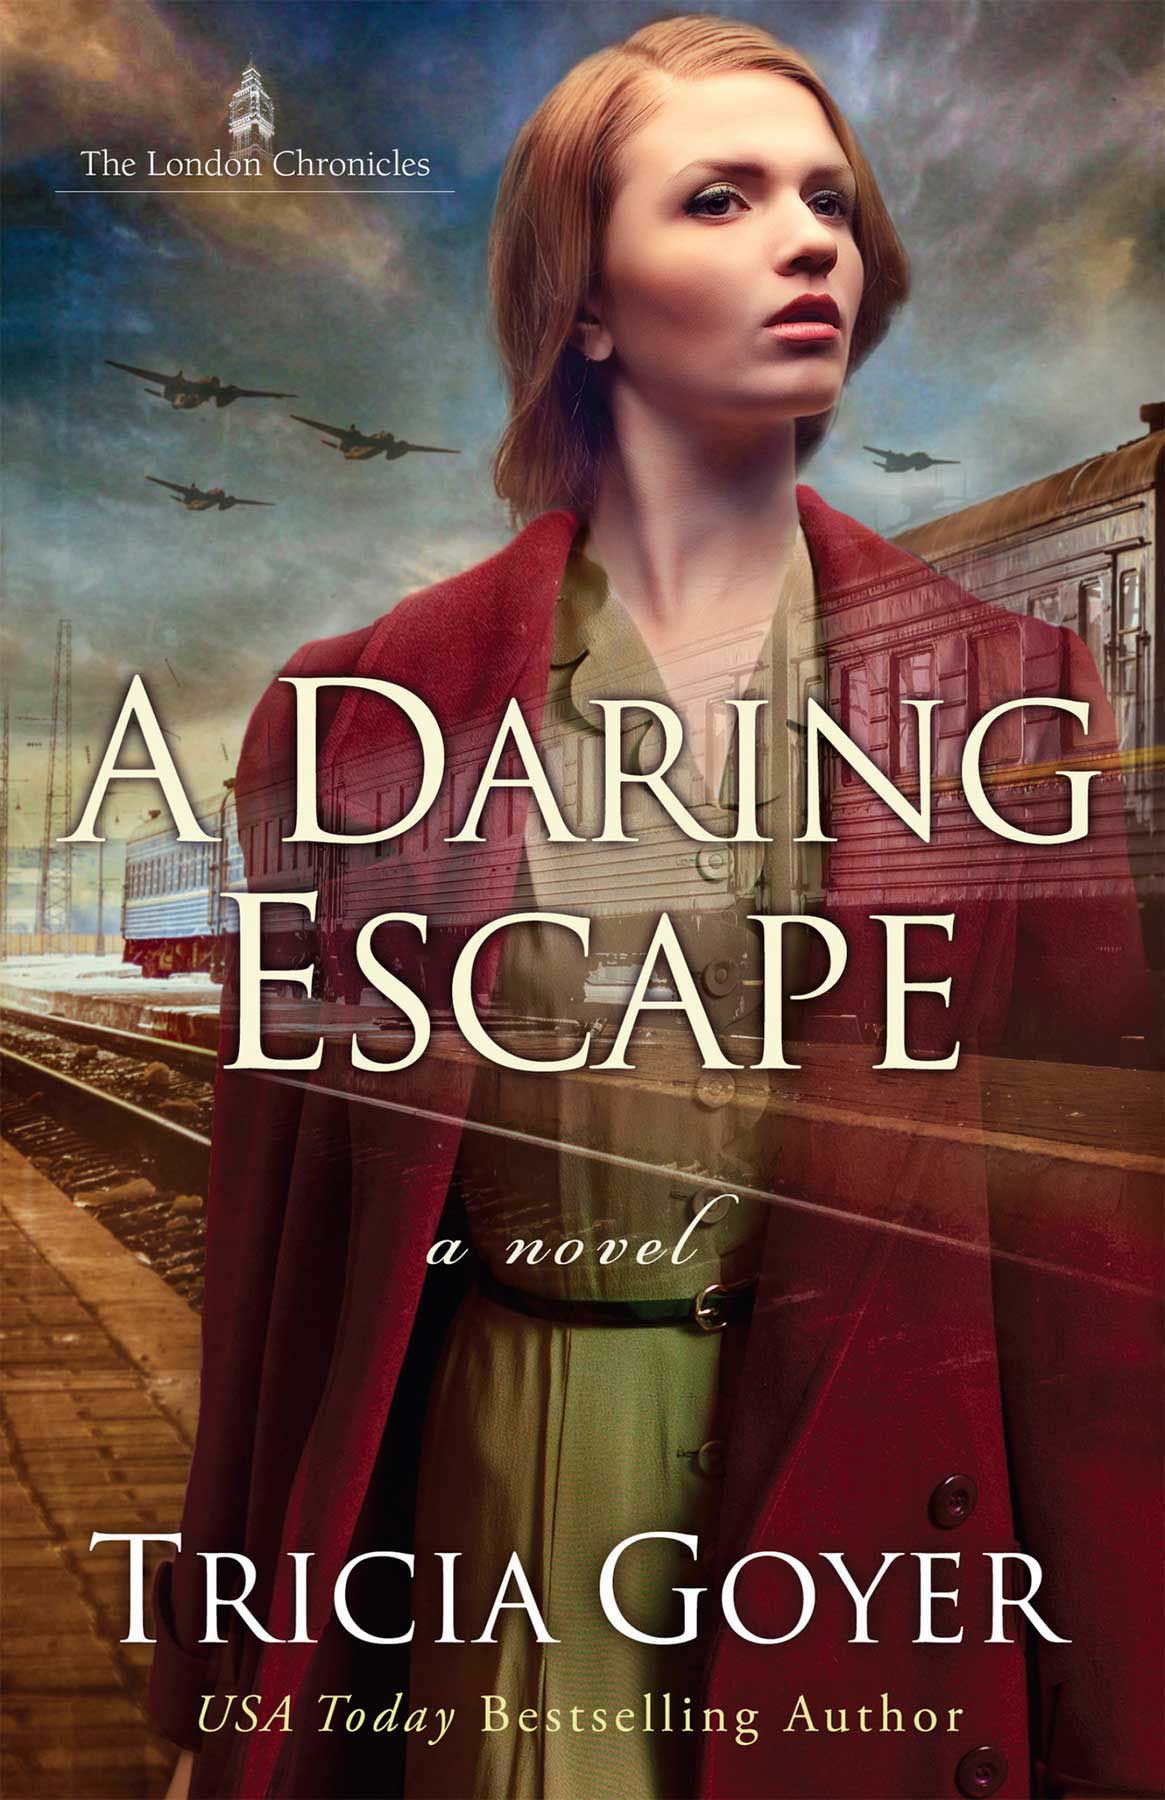 A Daring Escape by Tricia Goyer